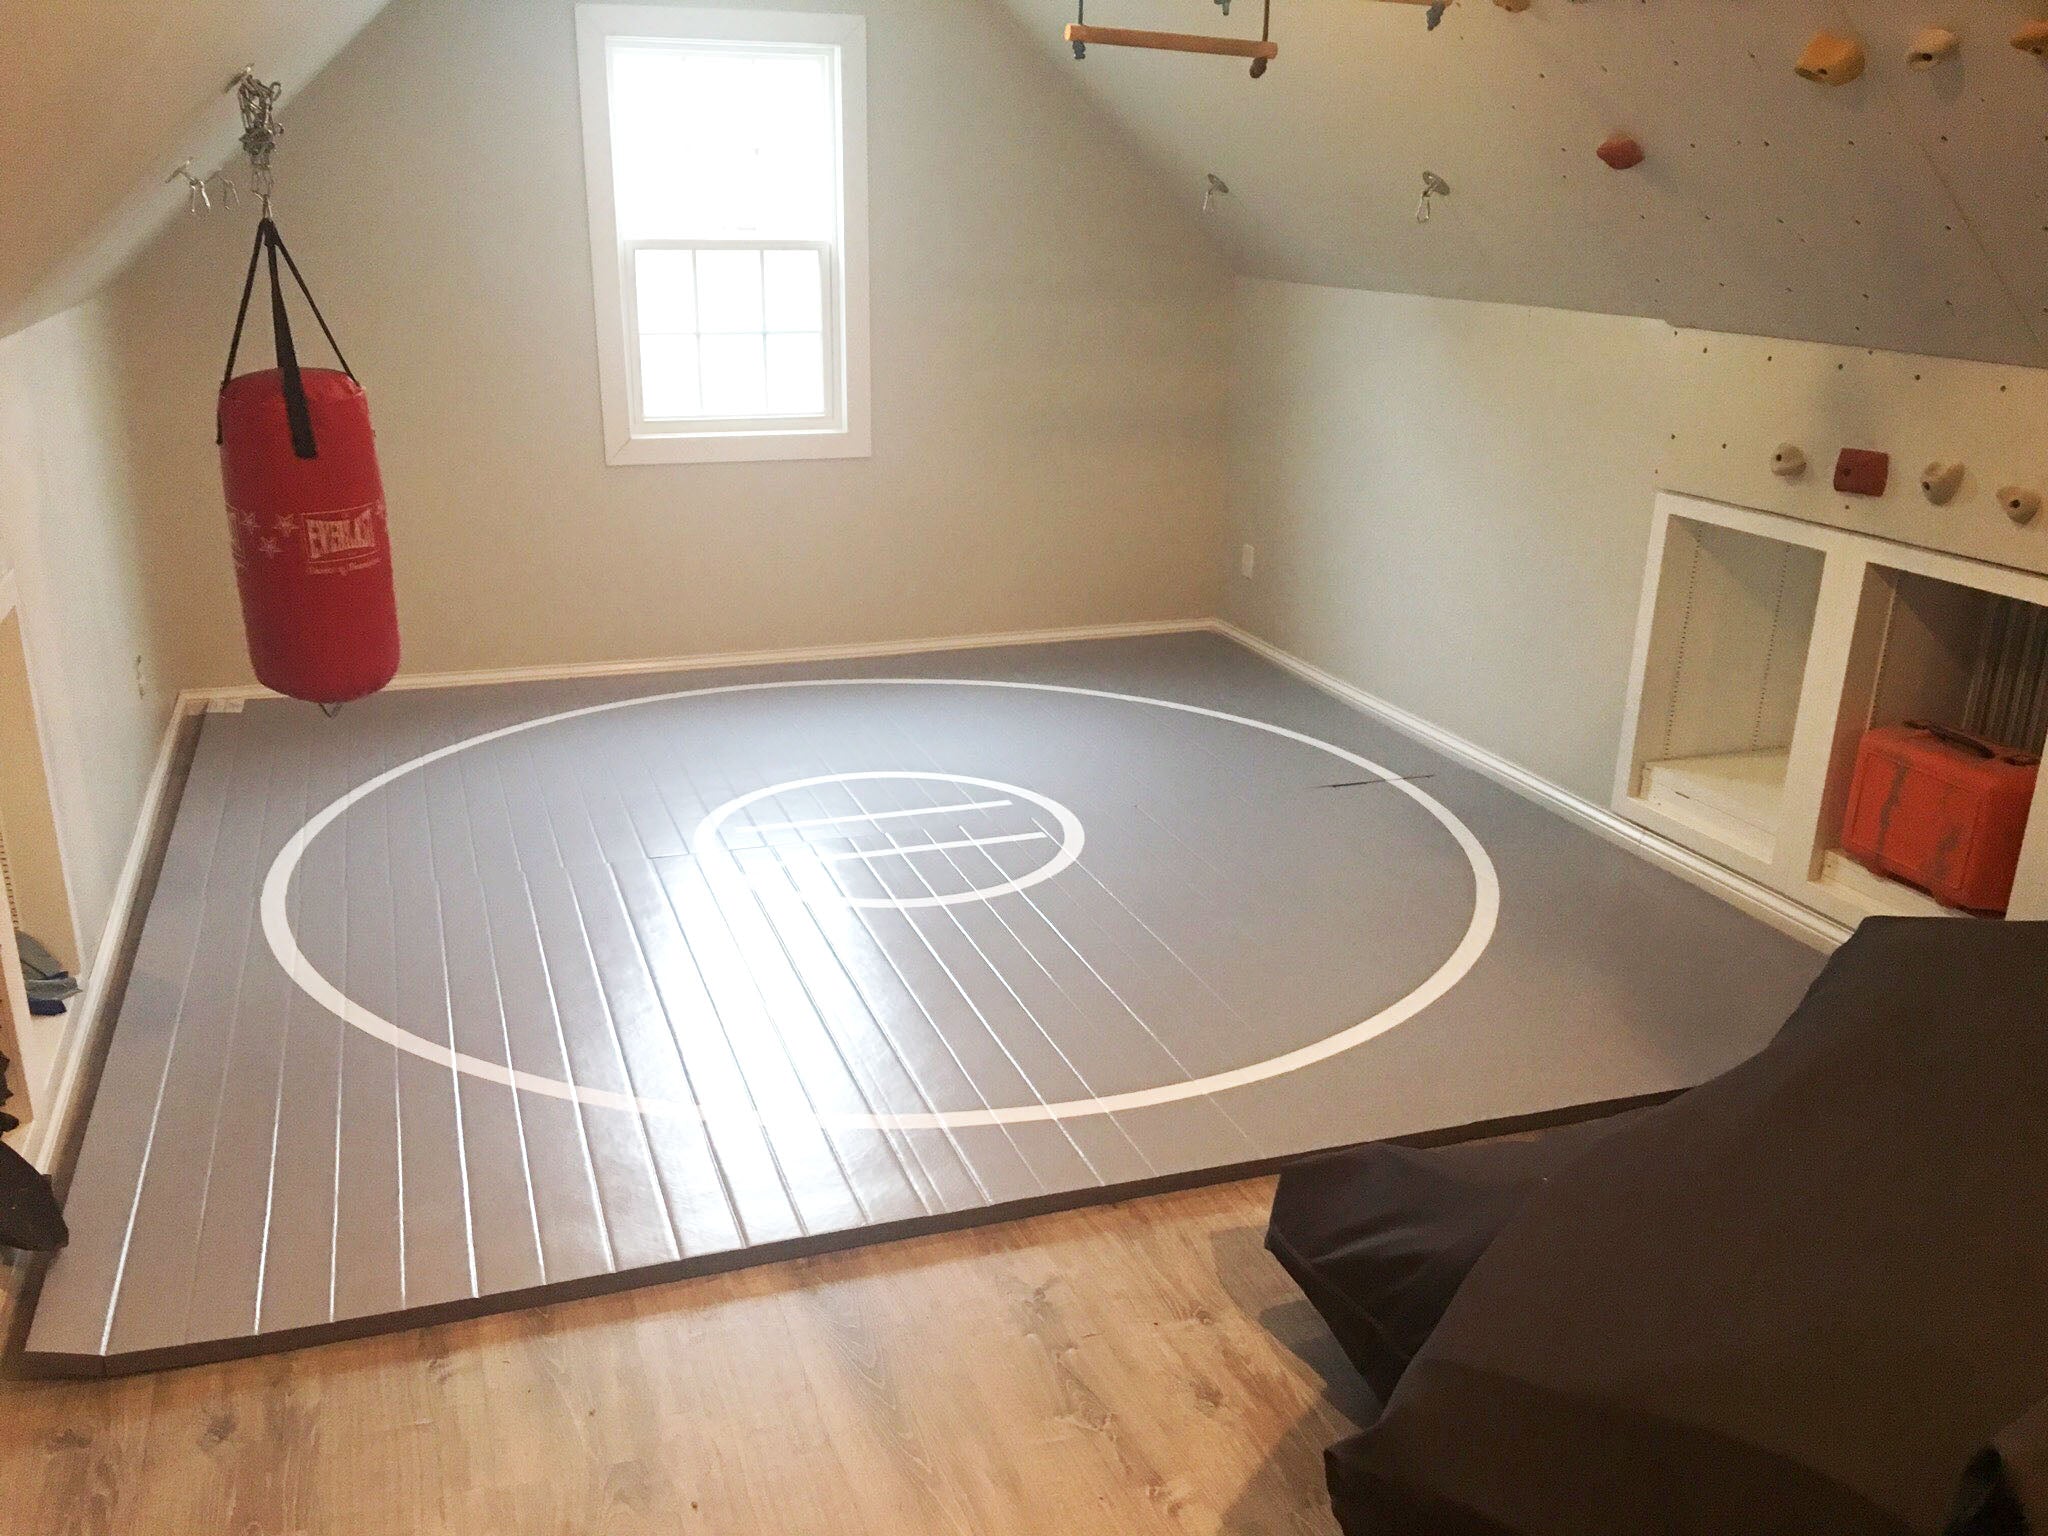 Instant Wrestling Room 10' x 10' wrestling mat and Removable Roll Up W